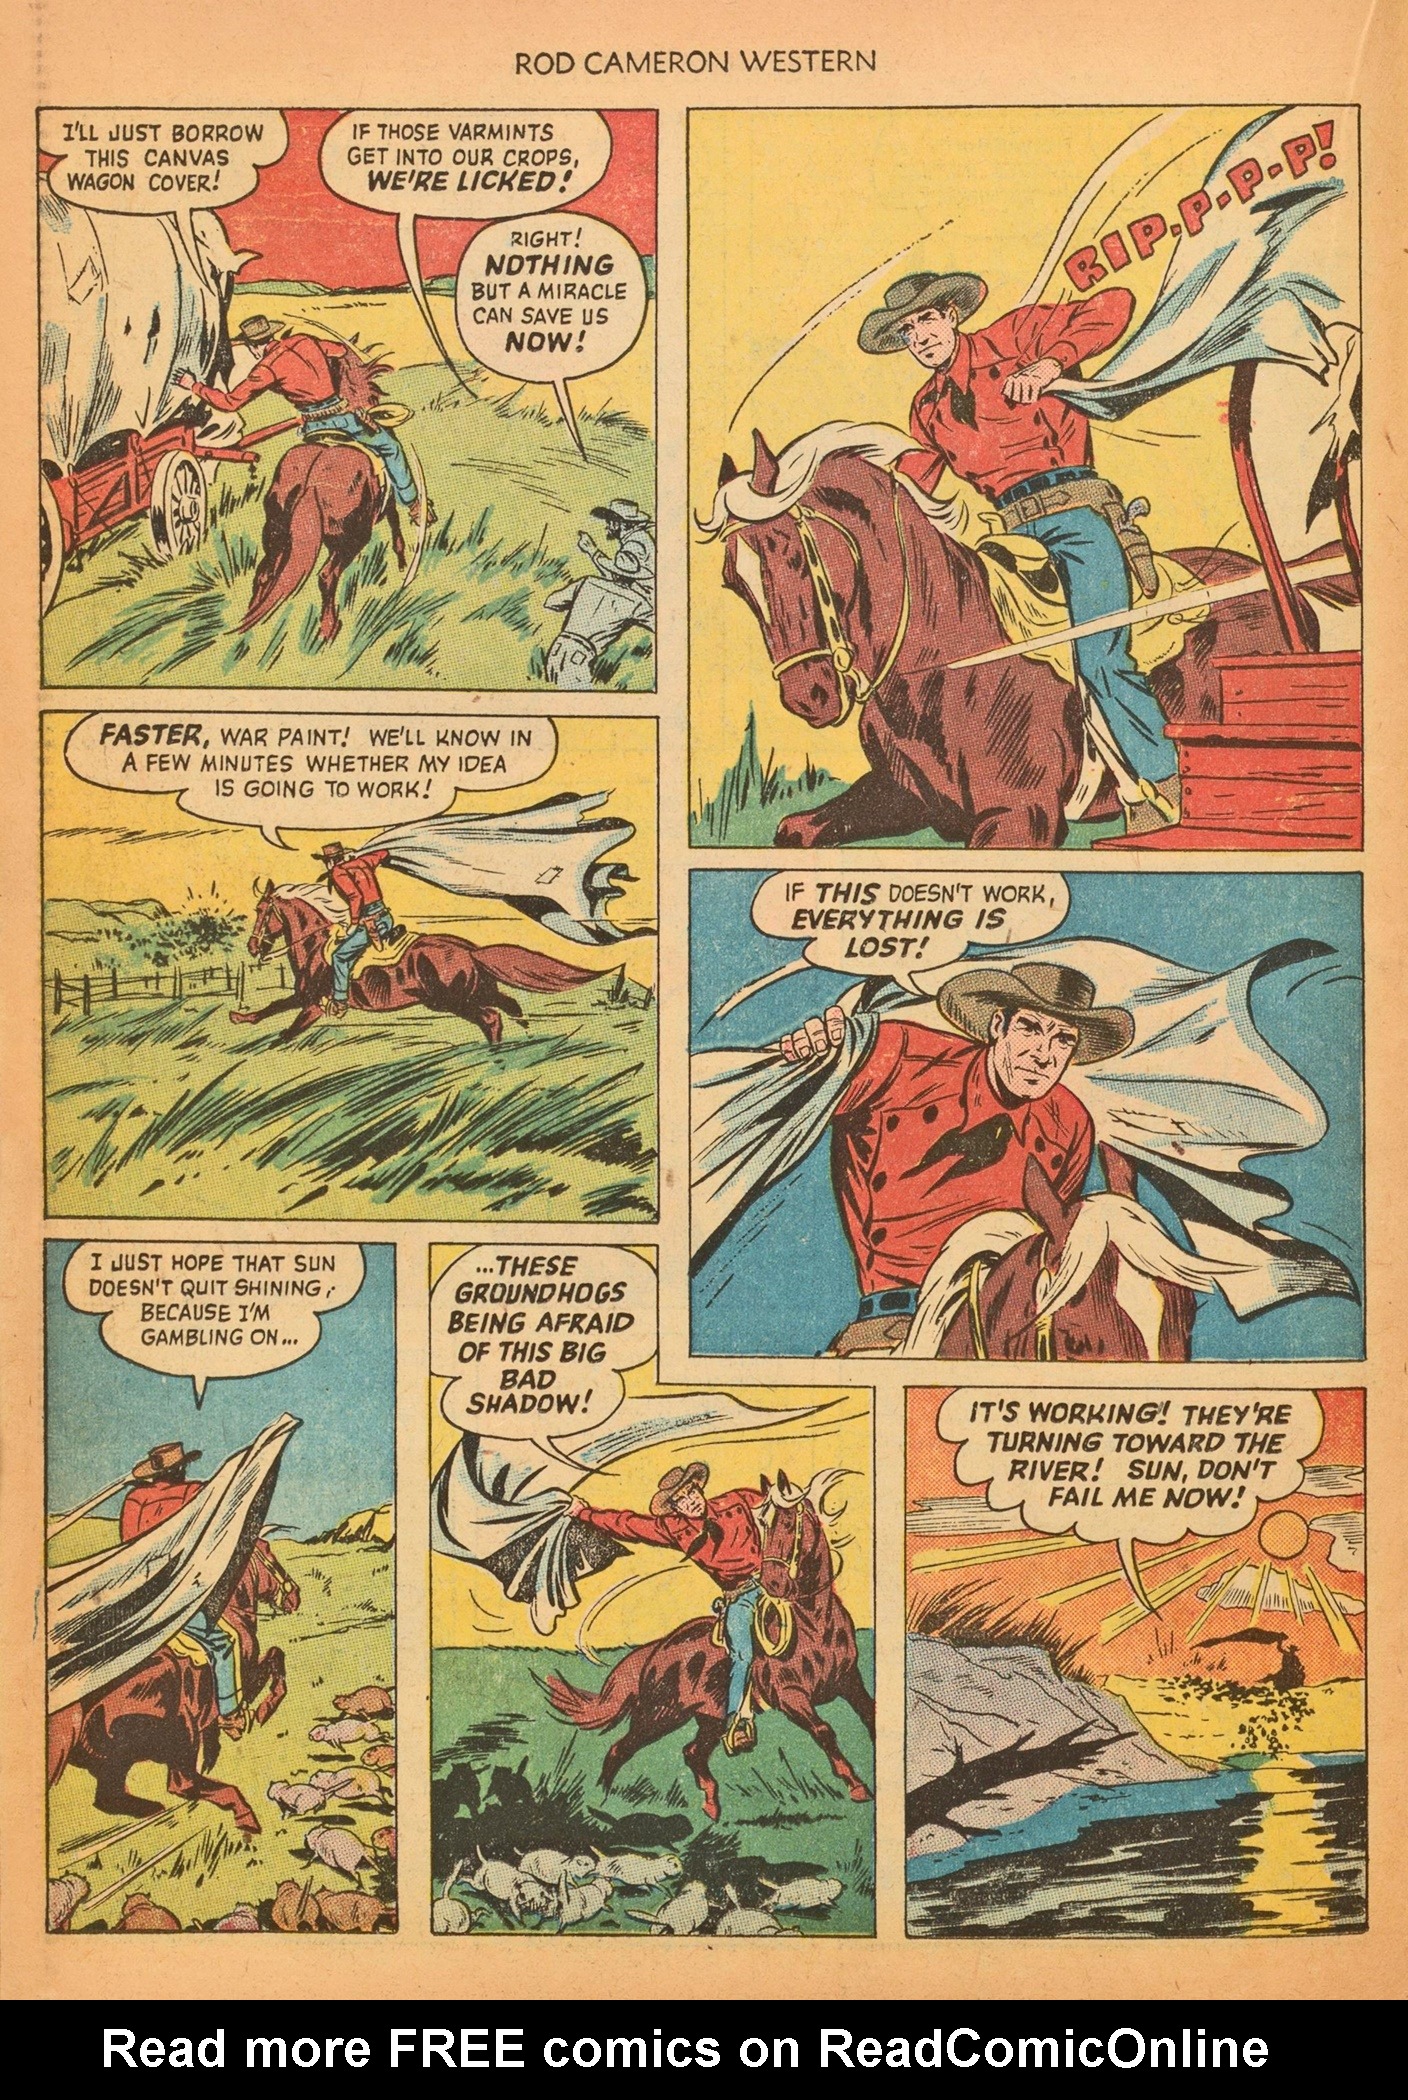 Read online Rod Cameron Western comic -  Issue #2 - 18